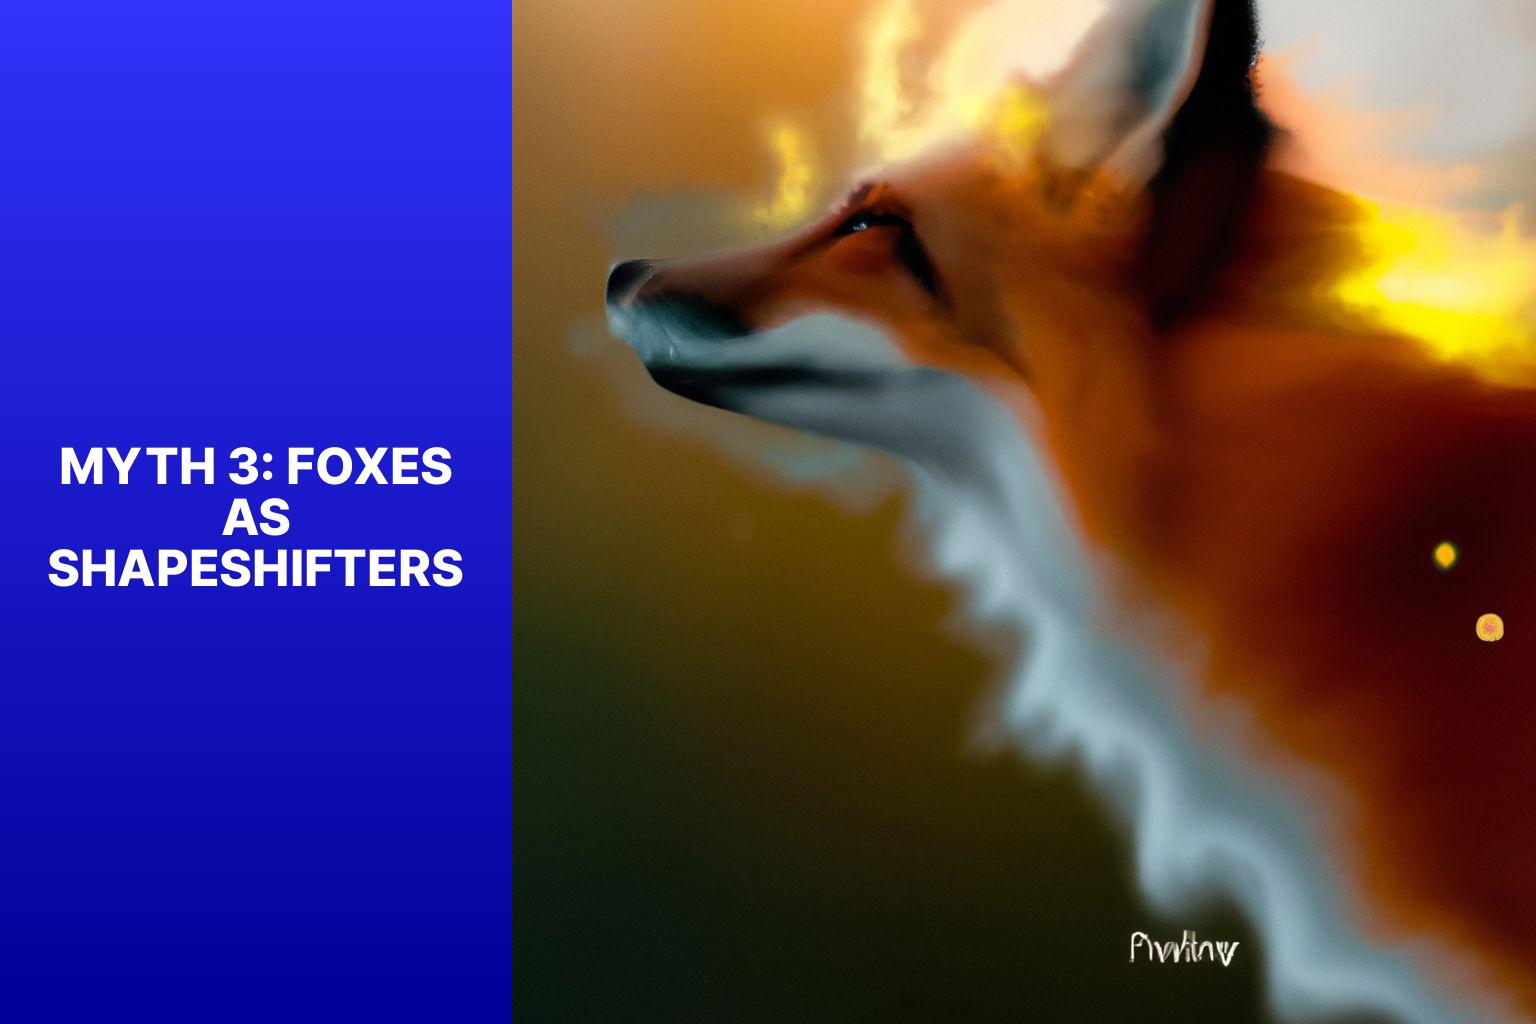 Myth 3: Foxes as Shapeshifters - Fox Myths in Unexplained Phenomena 